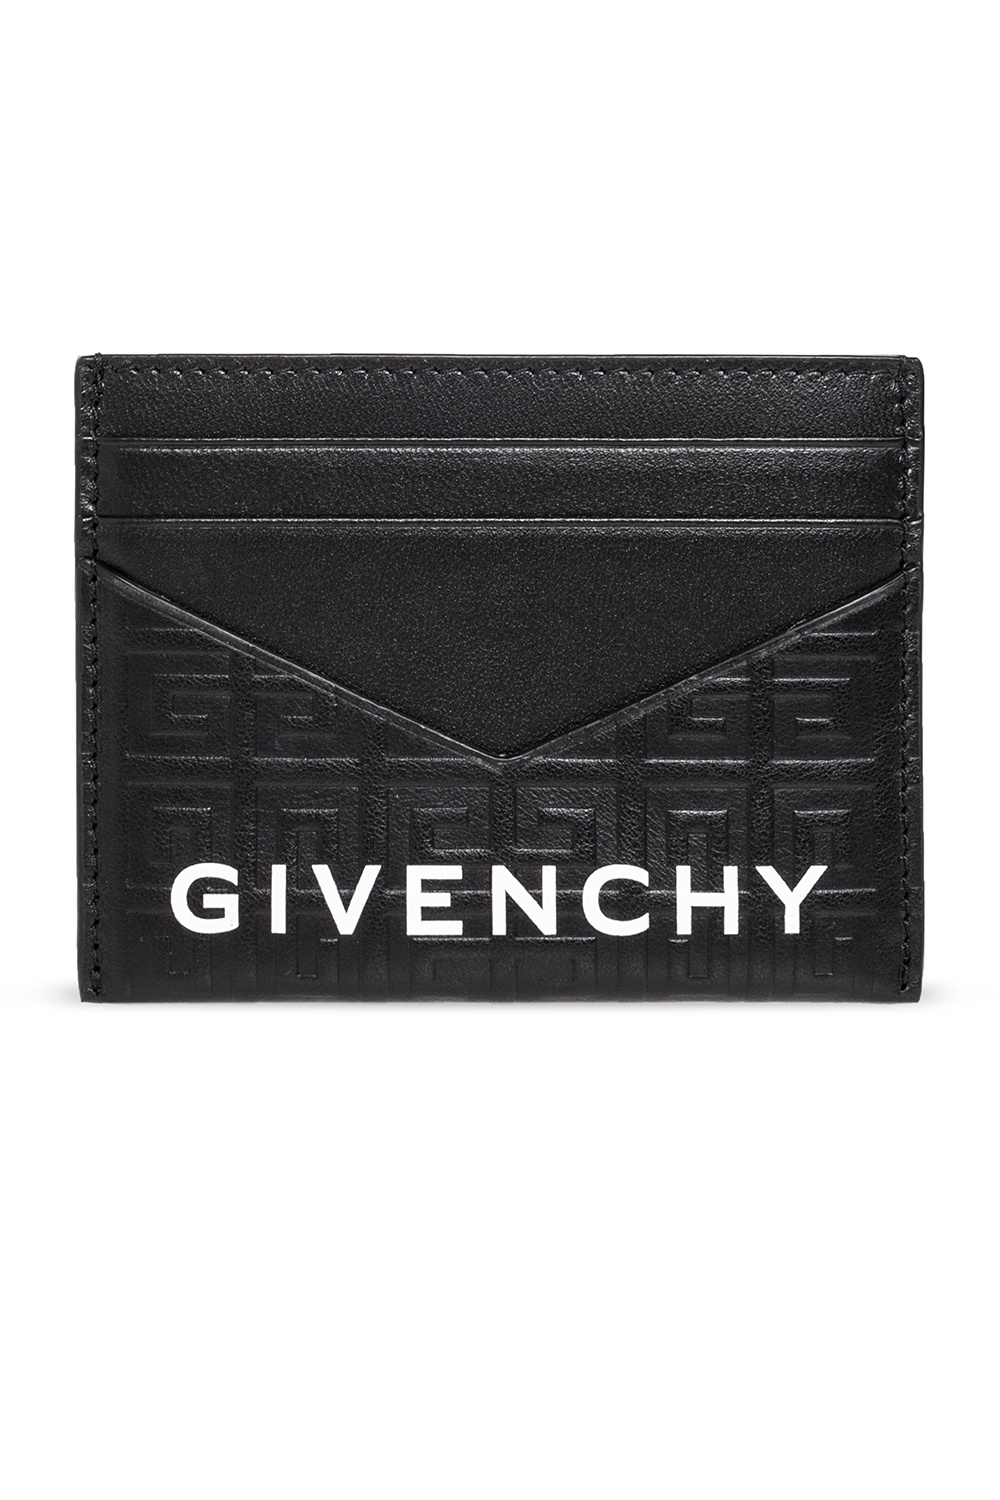 man givenchy knitwear sweater - GenesinlifeShops Spain - Black Card holder  Givenchy